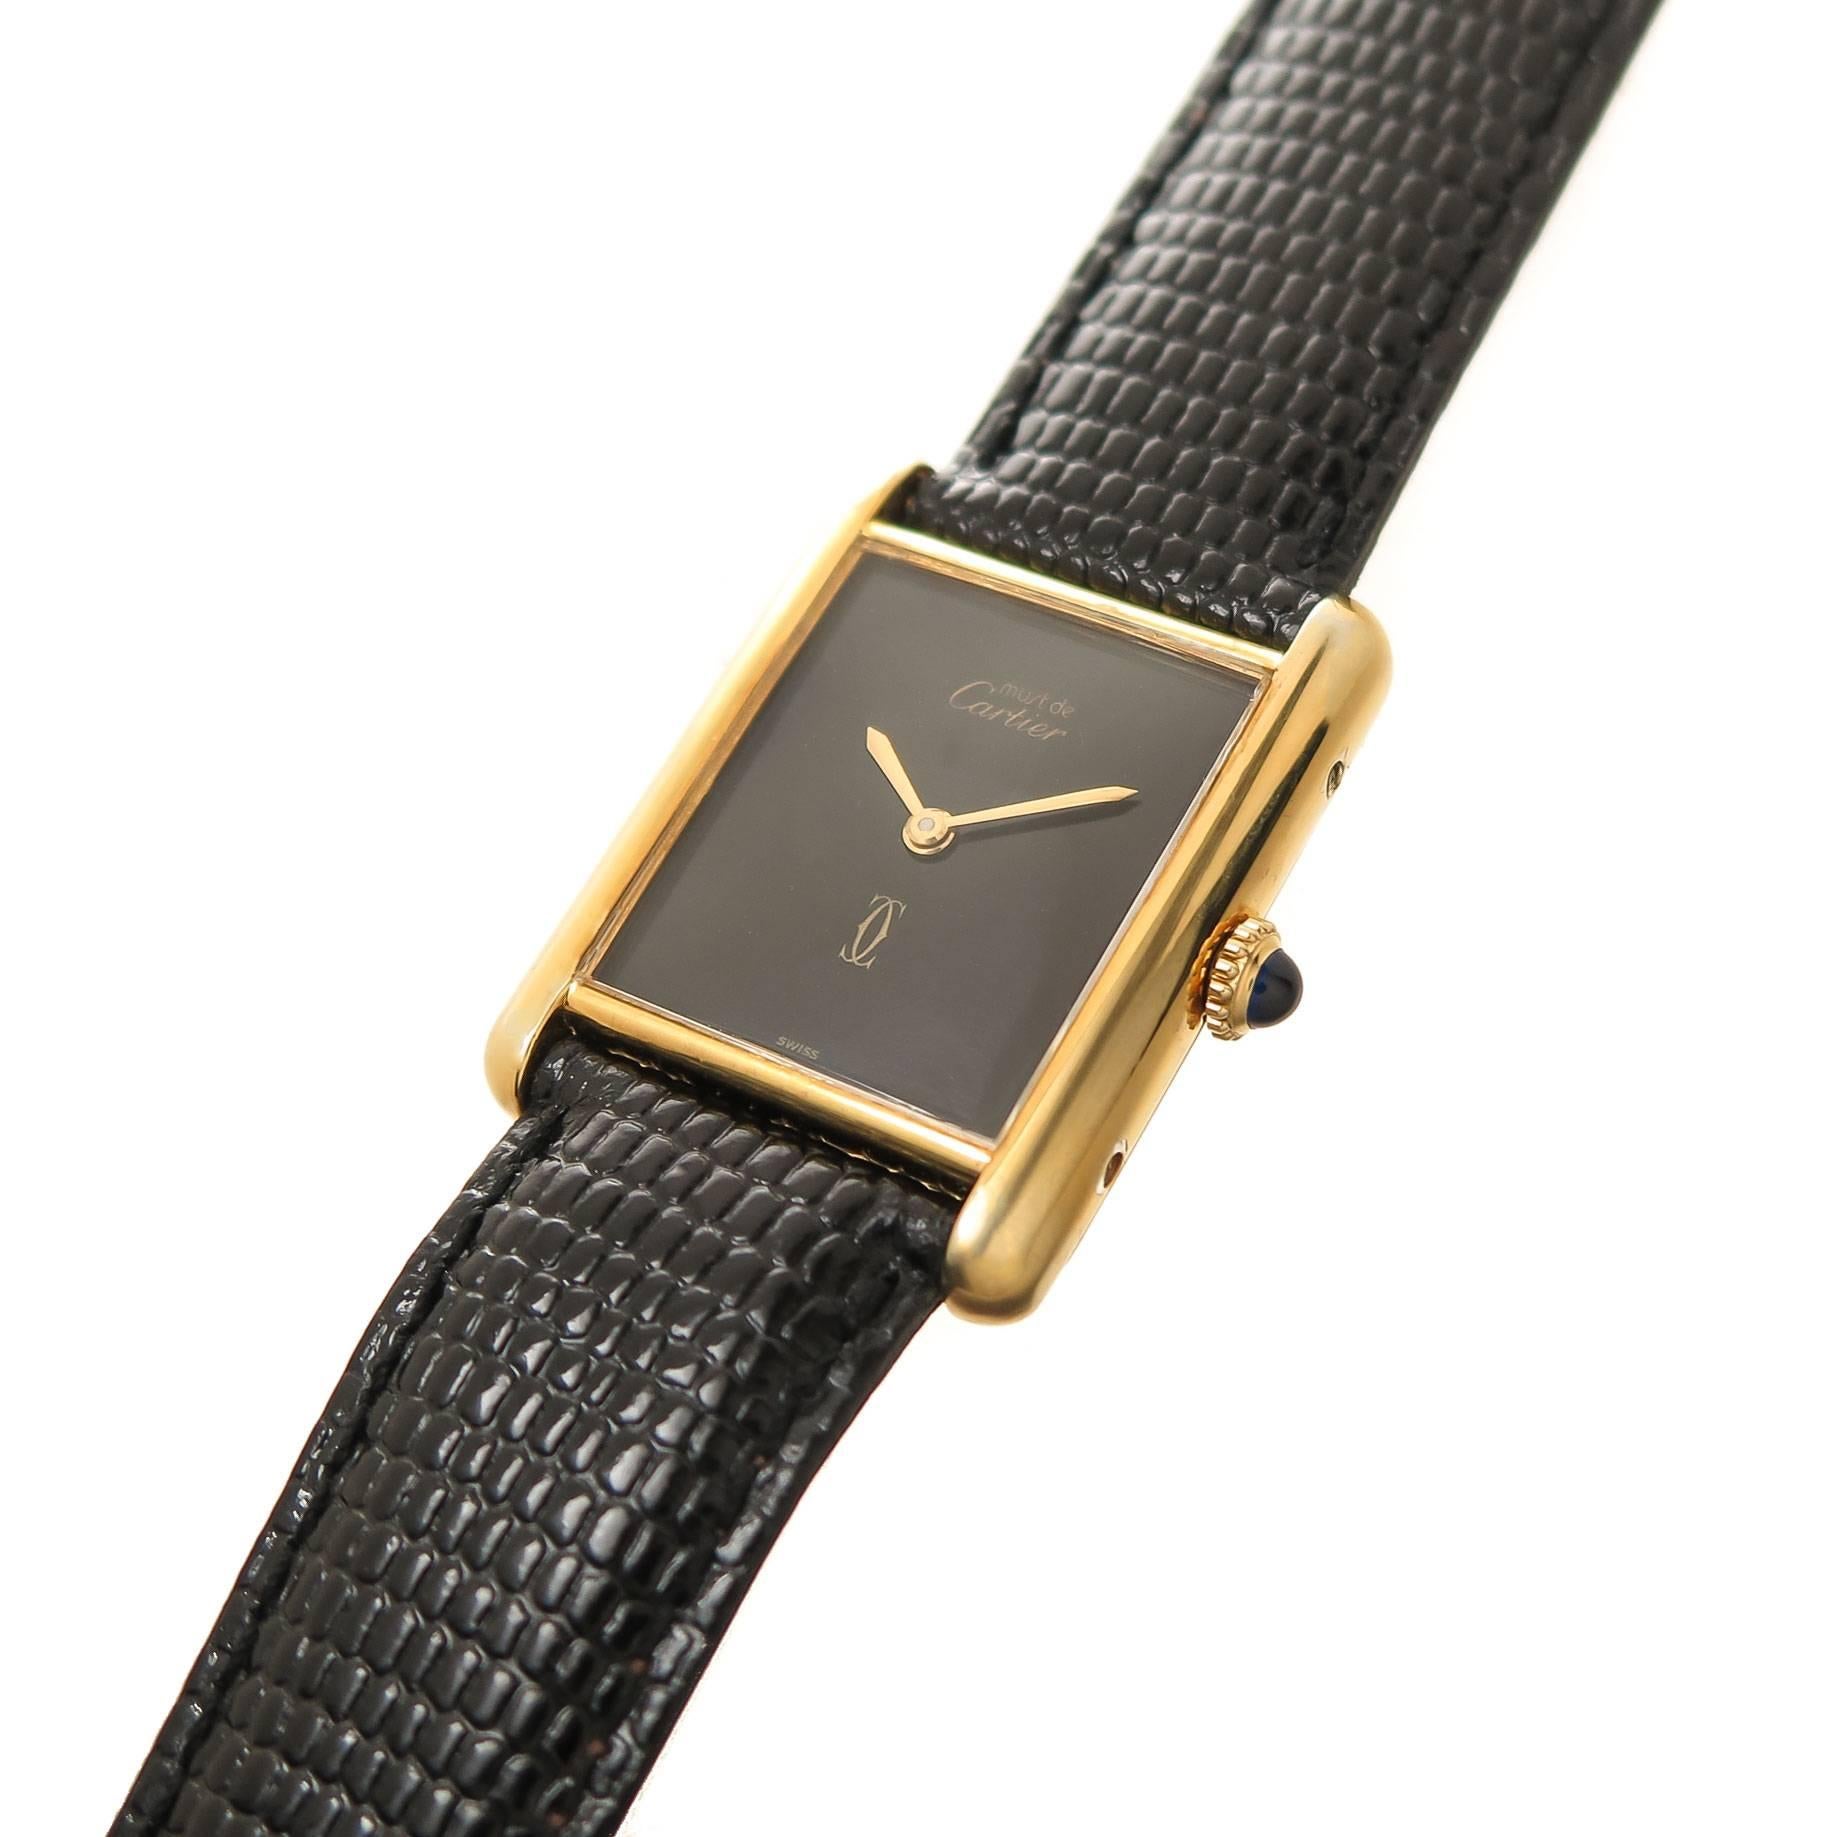 Circa 1990s Cartier, Must De Cartier collection classic Wrist Watch, 30 X 24 MM Vermeil, Gold Plate on Sterling Silver case. 17 jewel Manual wind mechanical movement, Black Dial with Gold hands, sapphire crown. New Black Lizard strap with original